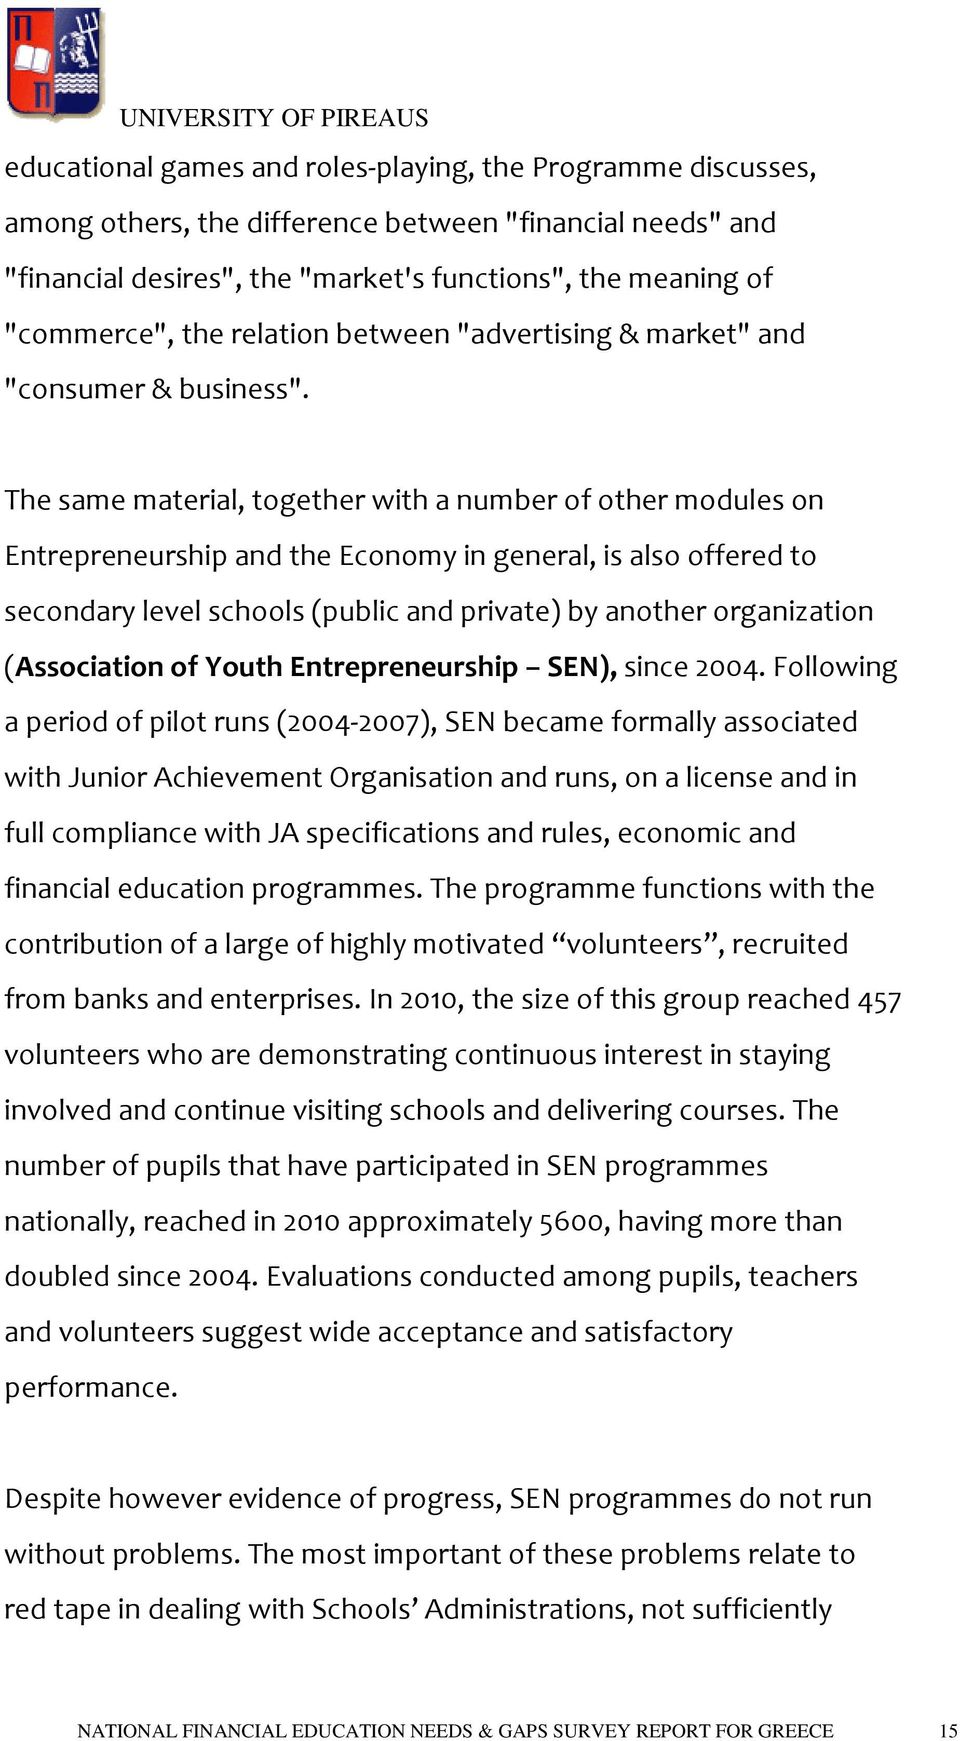 The same material, together with a number of other modules on Entrepreneurship and the Economy in general, is also offered to secondary level schools (public and private) by another organization